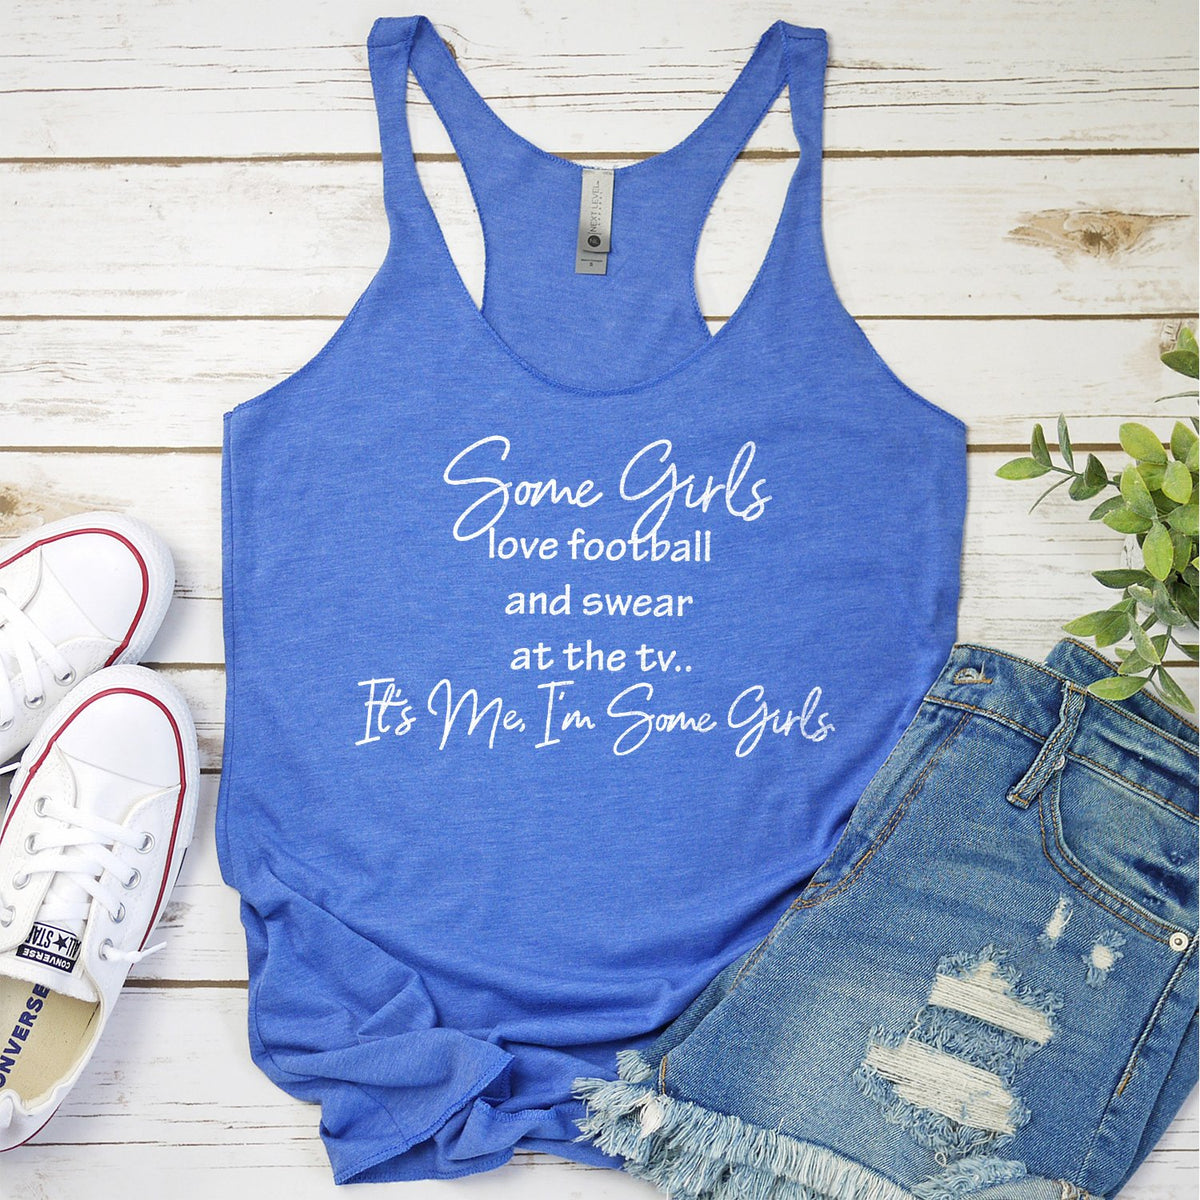 Some Girls Love Football and Swear at the TV - Tank Top Racerback